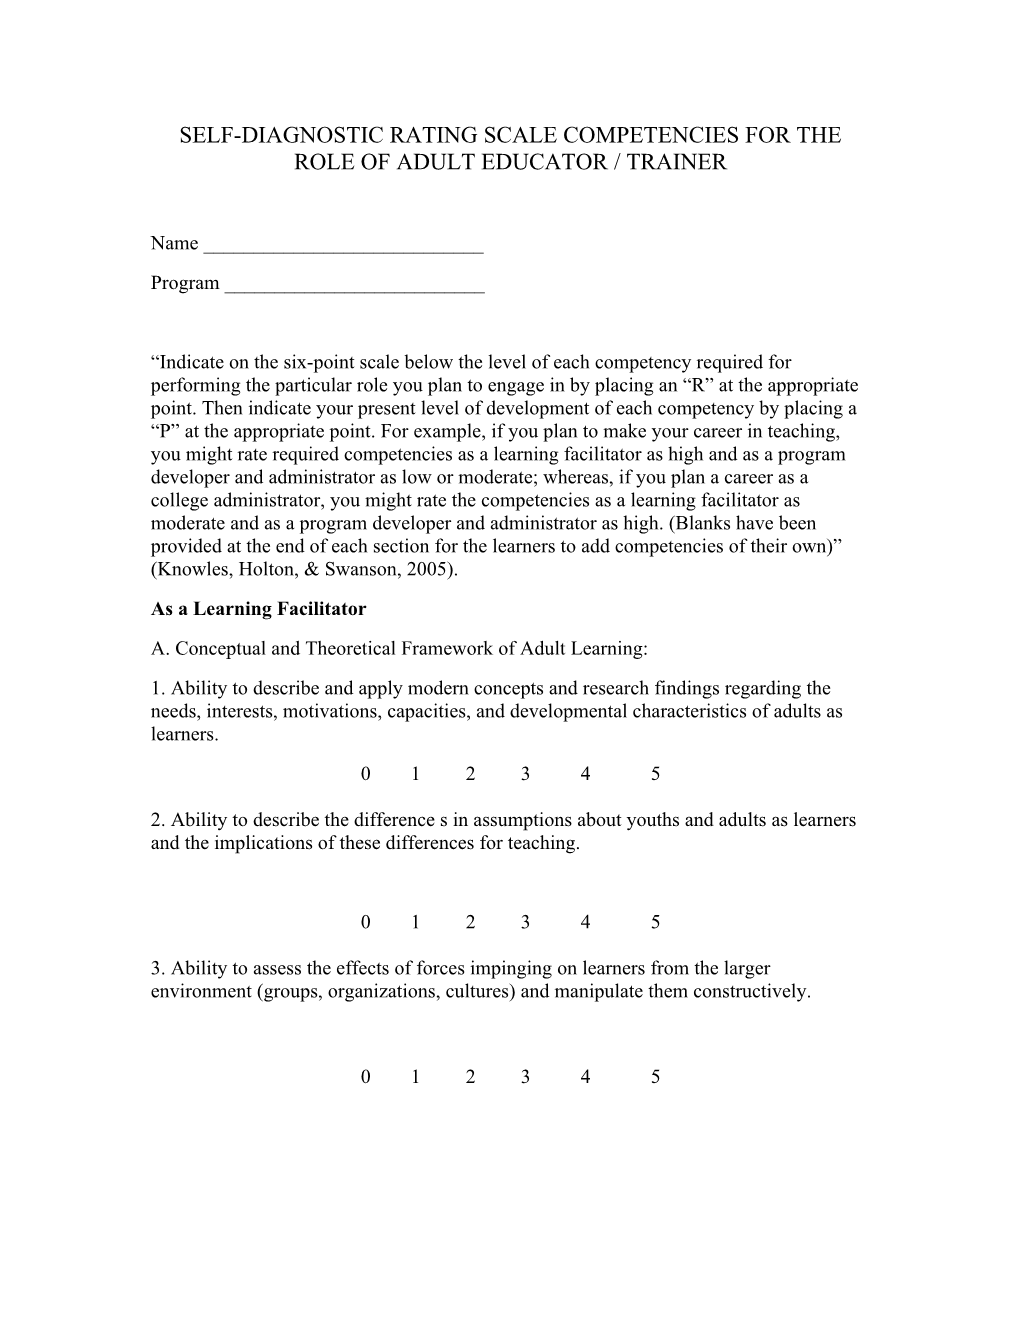 Self-Diagnostic Rating Scale Competencies for the Role of Adult Educator / Trainer